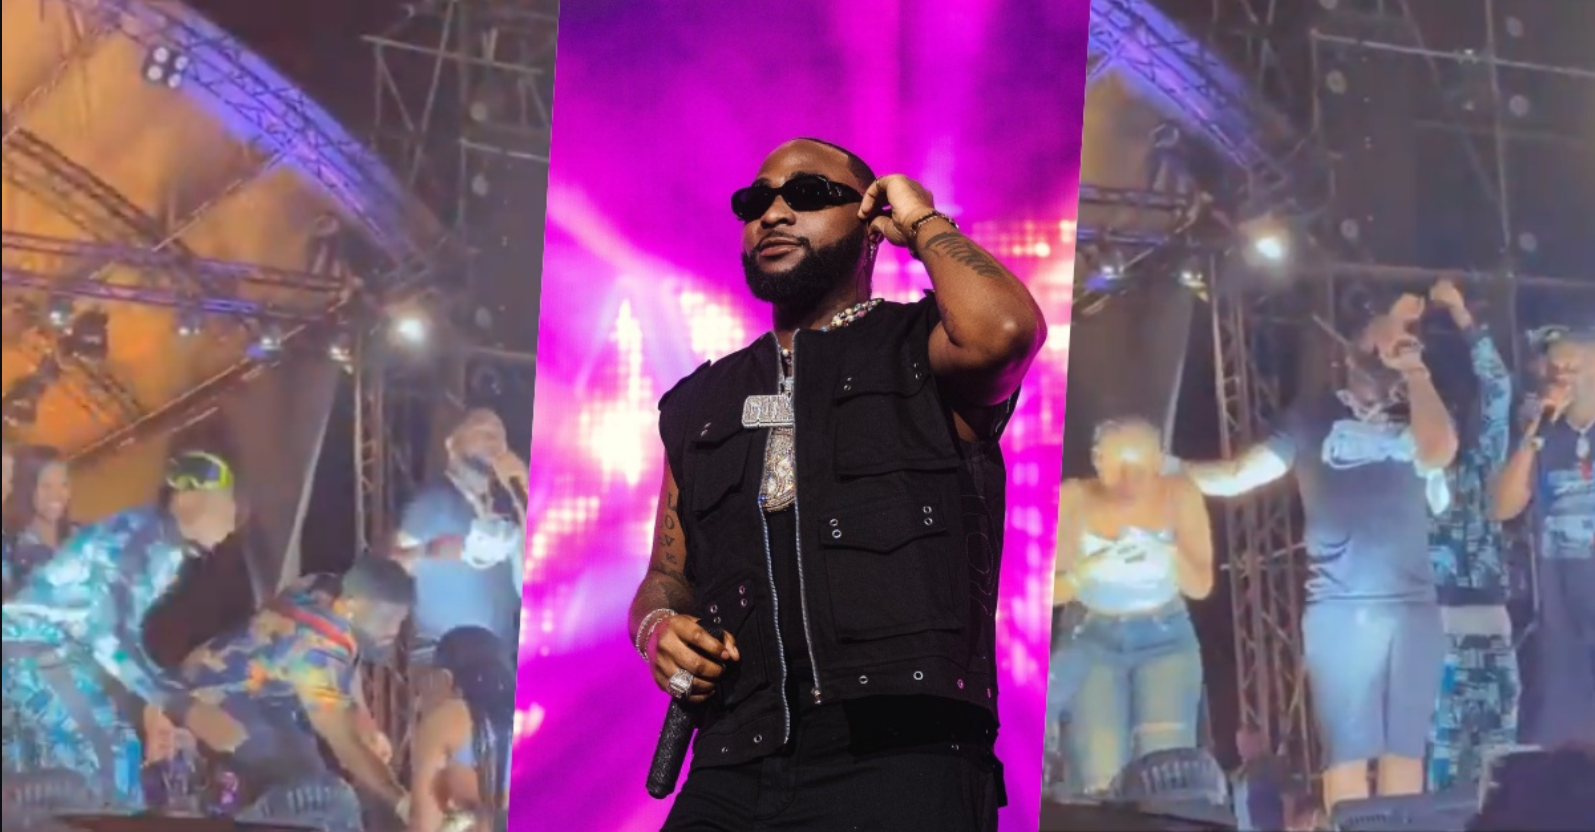 Davido has gathered reactions online after he gifted a female fan a whopping sum of N10 million during his performance in Port Harcout, Rivers State.